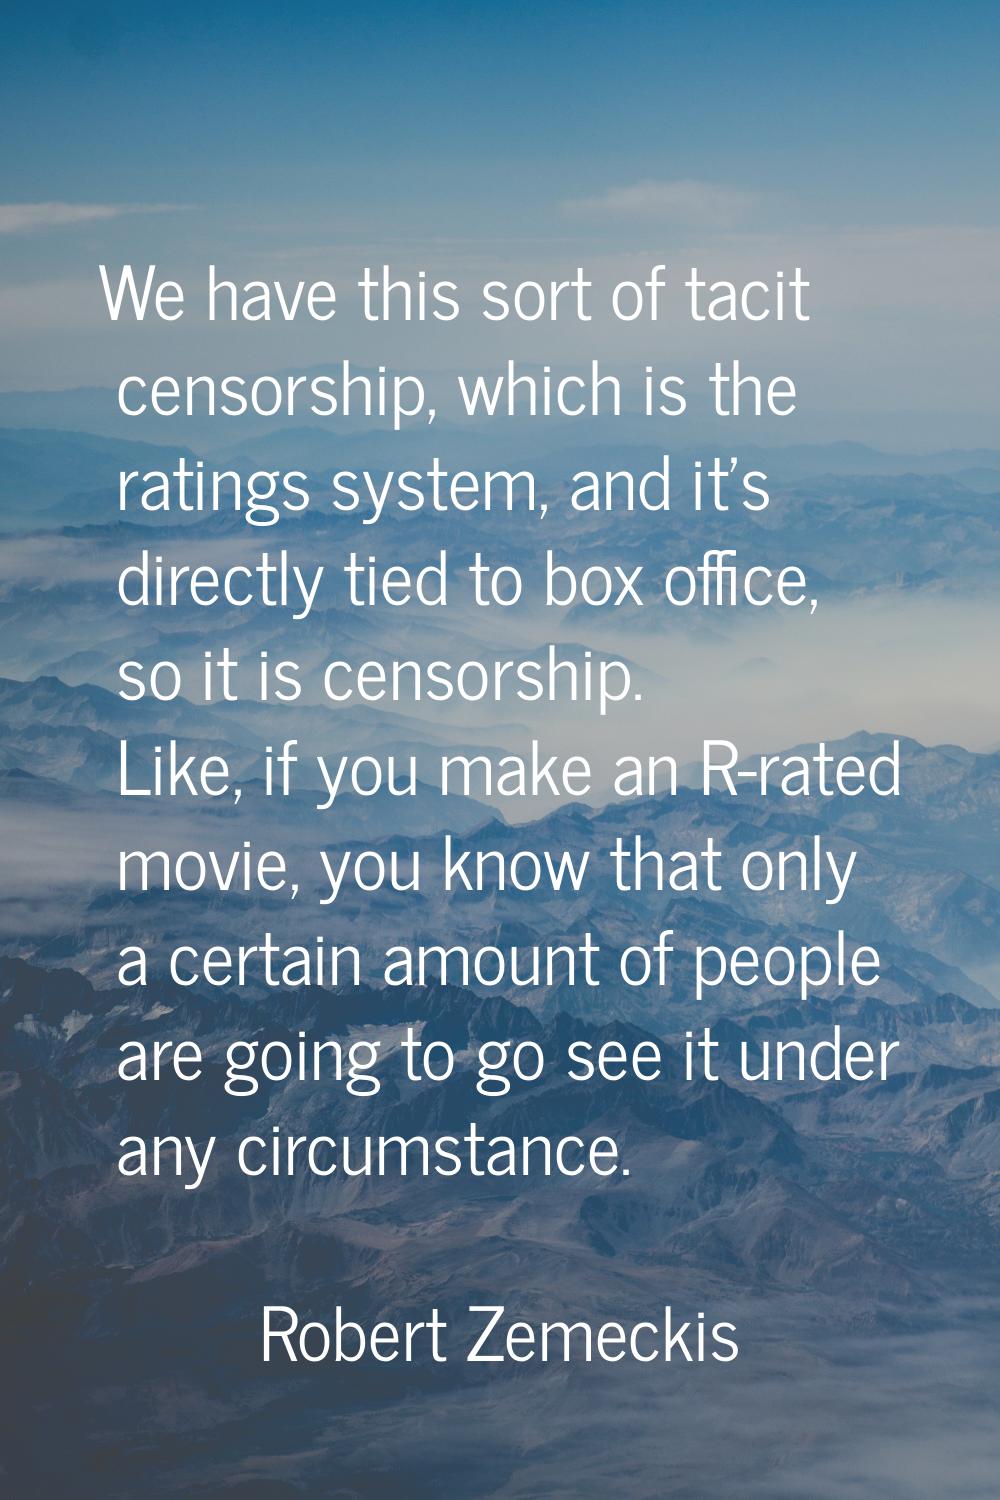 We have this sort of tacit censorship, which is the ratings system, and it's directly tied to box o